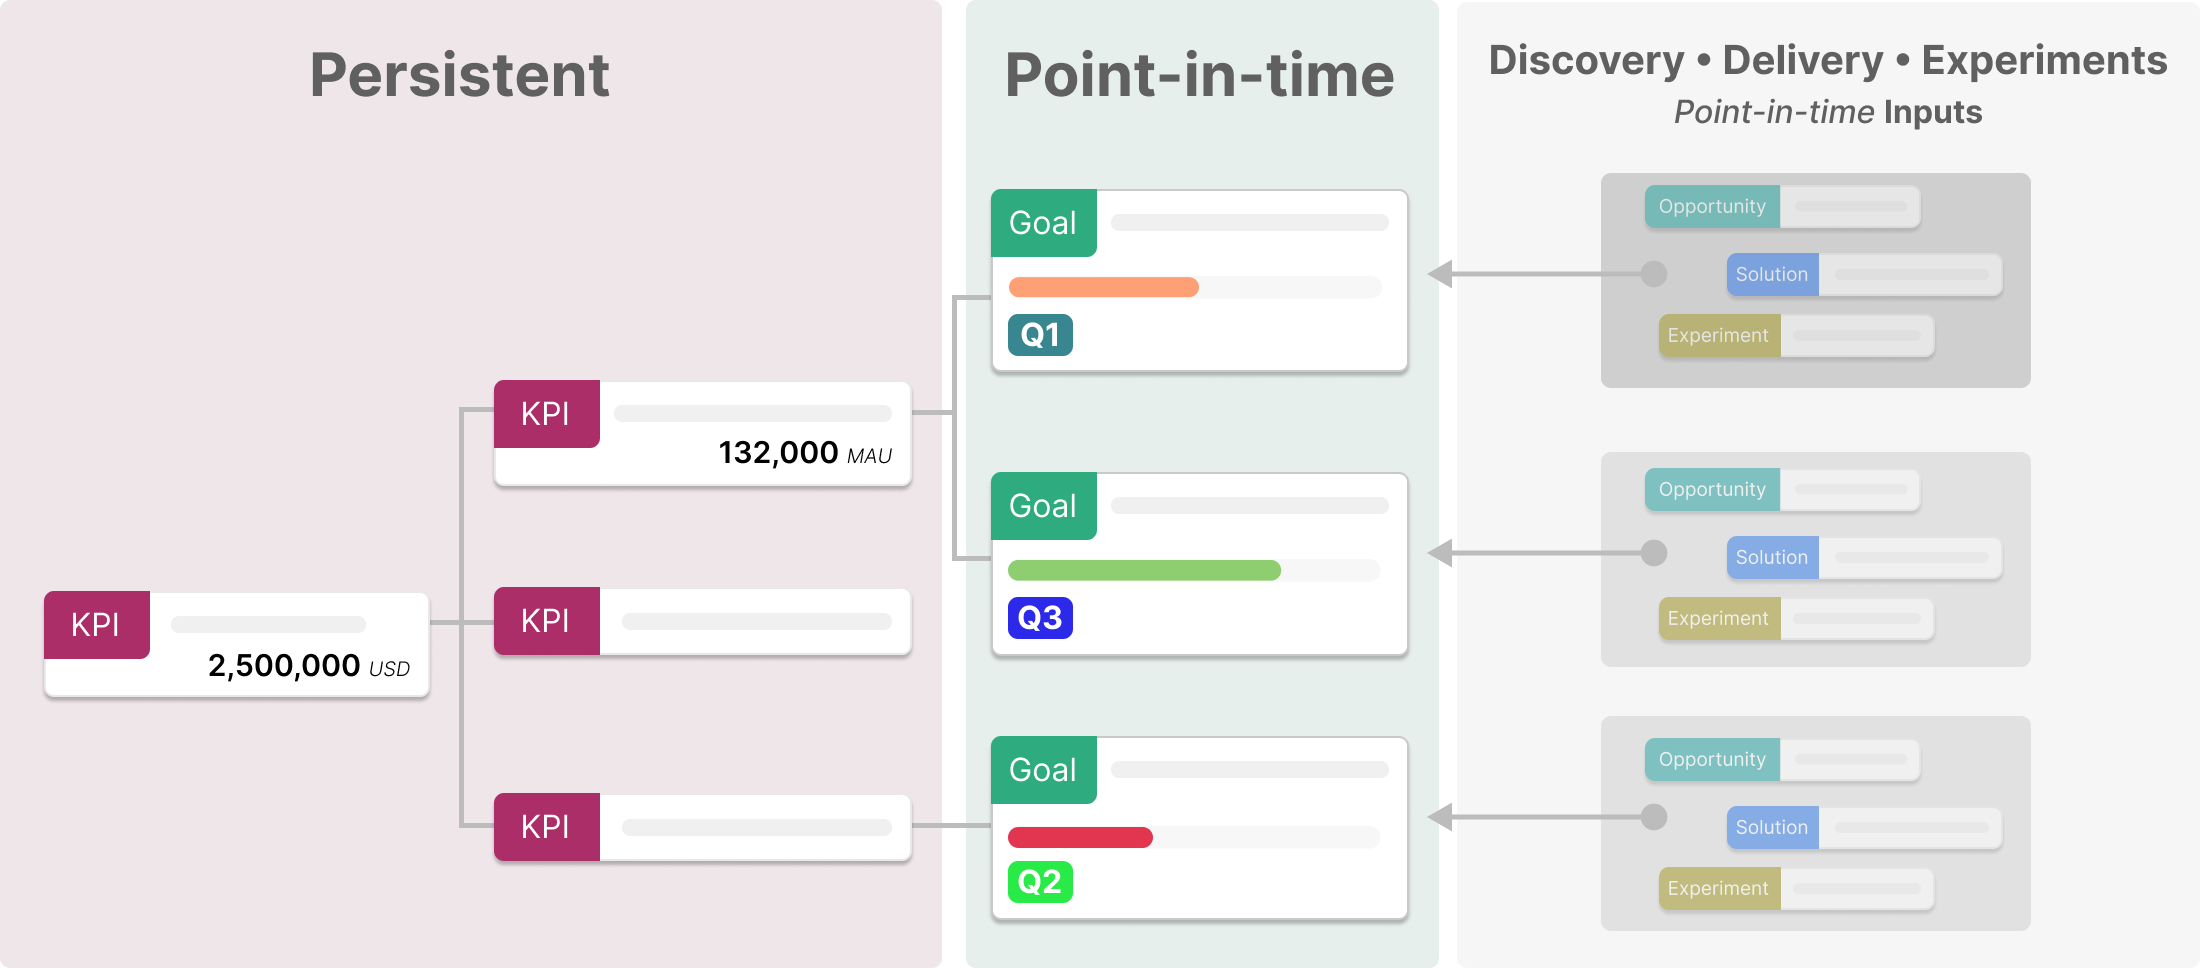 KPI Trees Persistent vs. Point-in-time